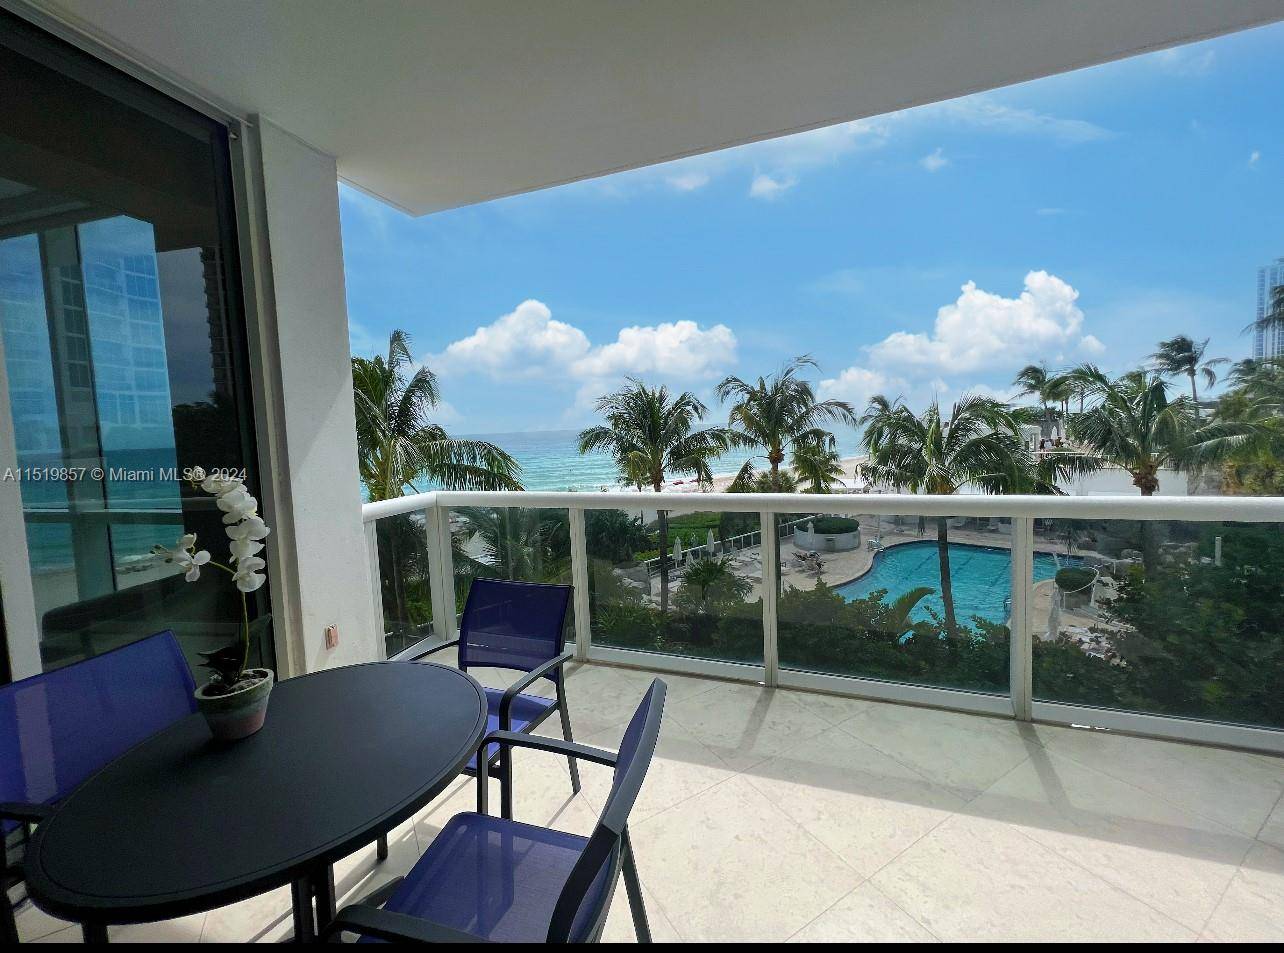 Located in a prime beachfront location and ready to move in, this 2 bedroom, 2.